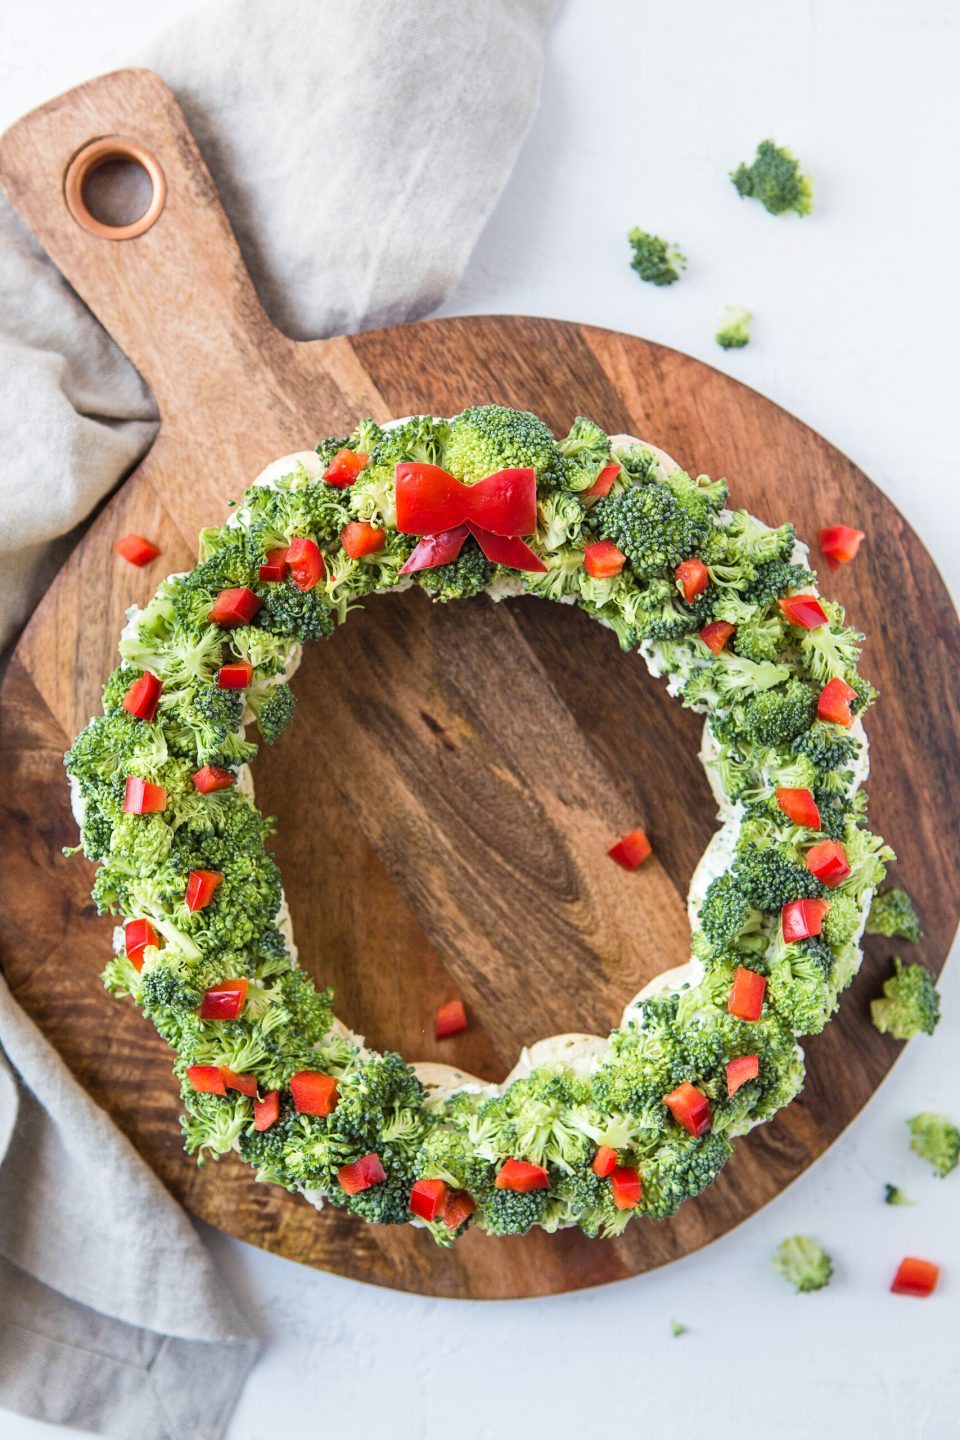 Dough balls that are cooked in the shape of a wreath. Then topped with a cream cheese and ranch mixture and sprinkled with chopped broccoli and red pepper.